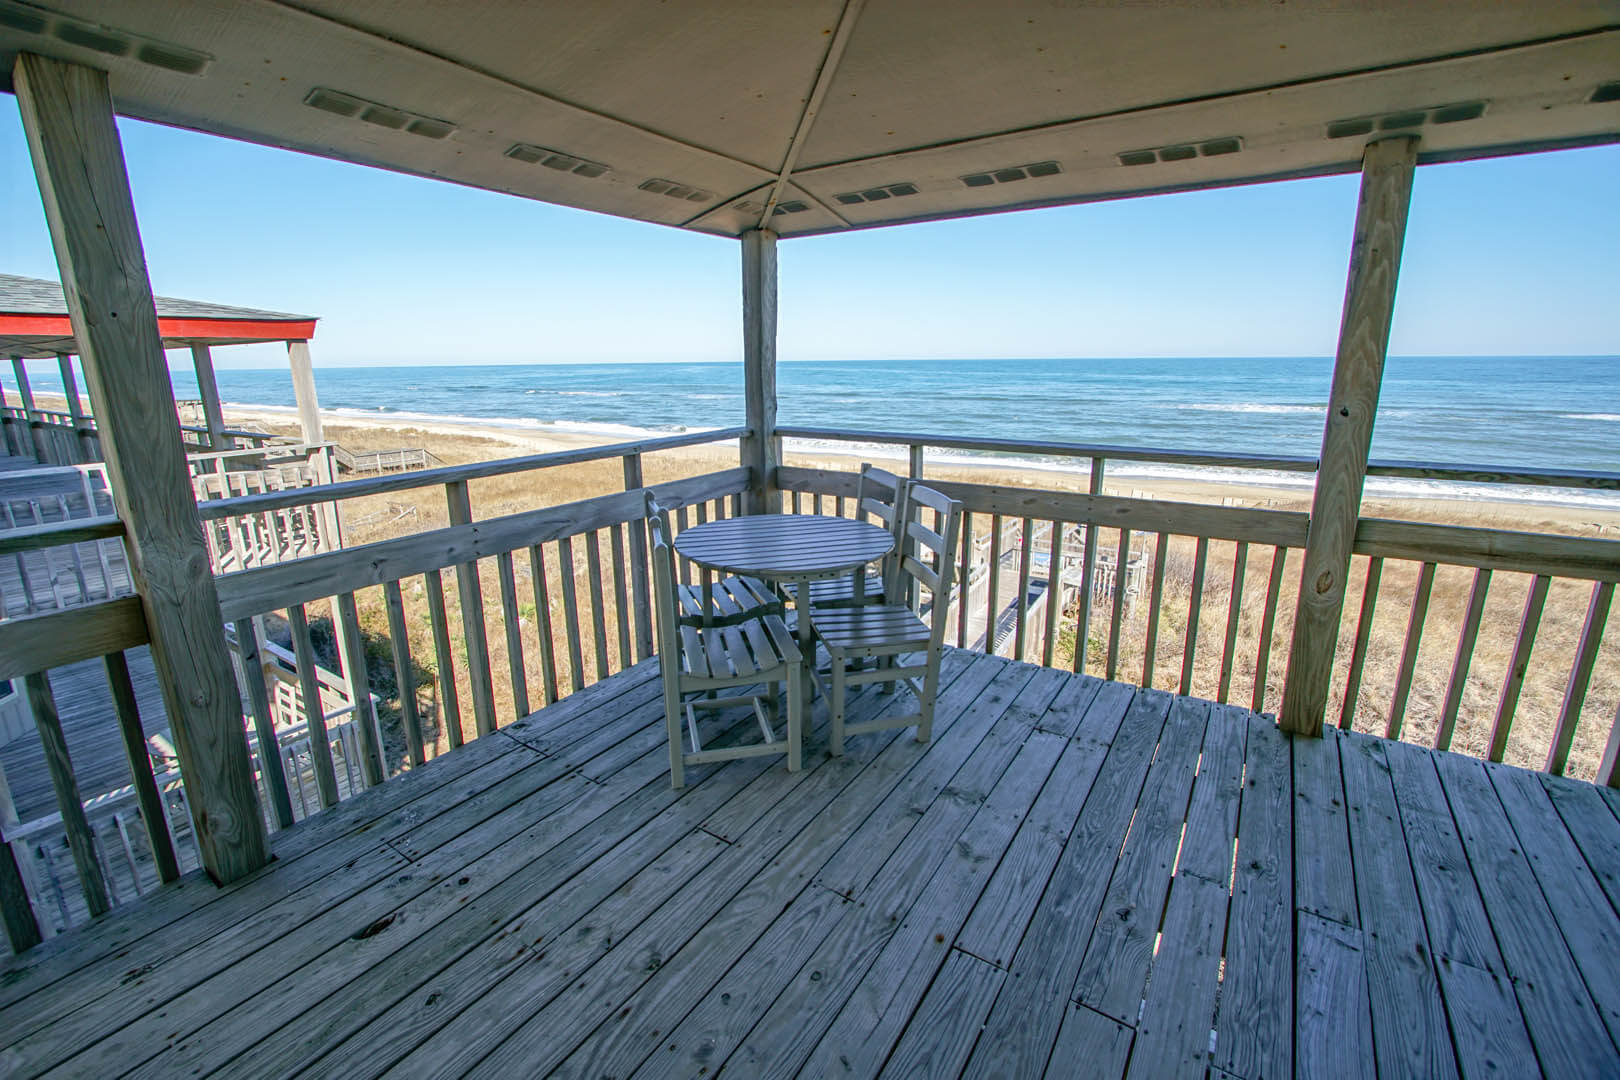 A breathtaking view at VRI's Outer Banks Beach Club in North Carolina.